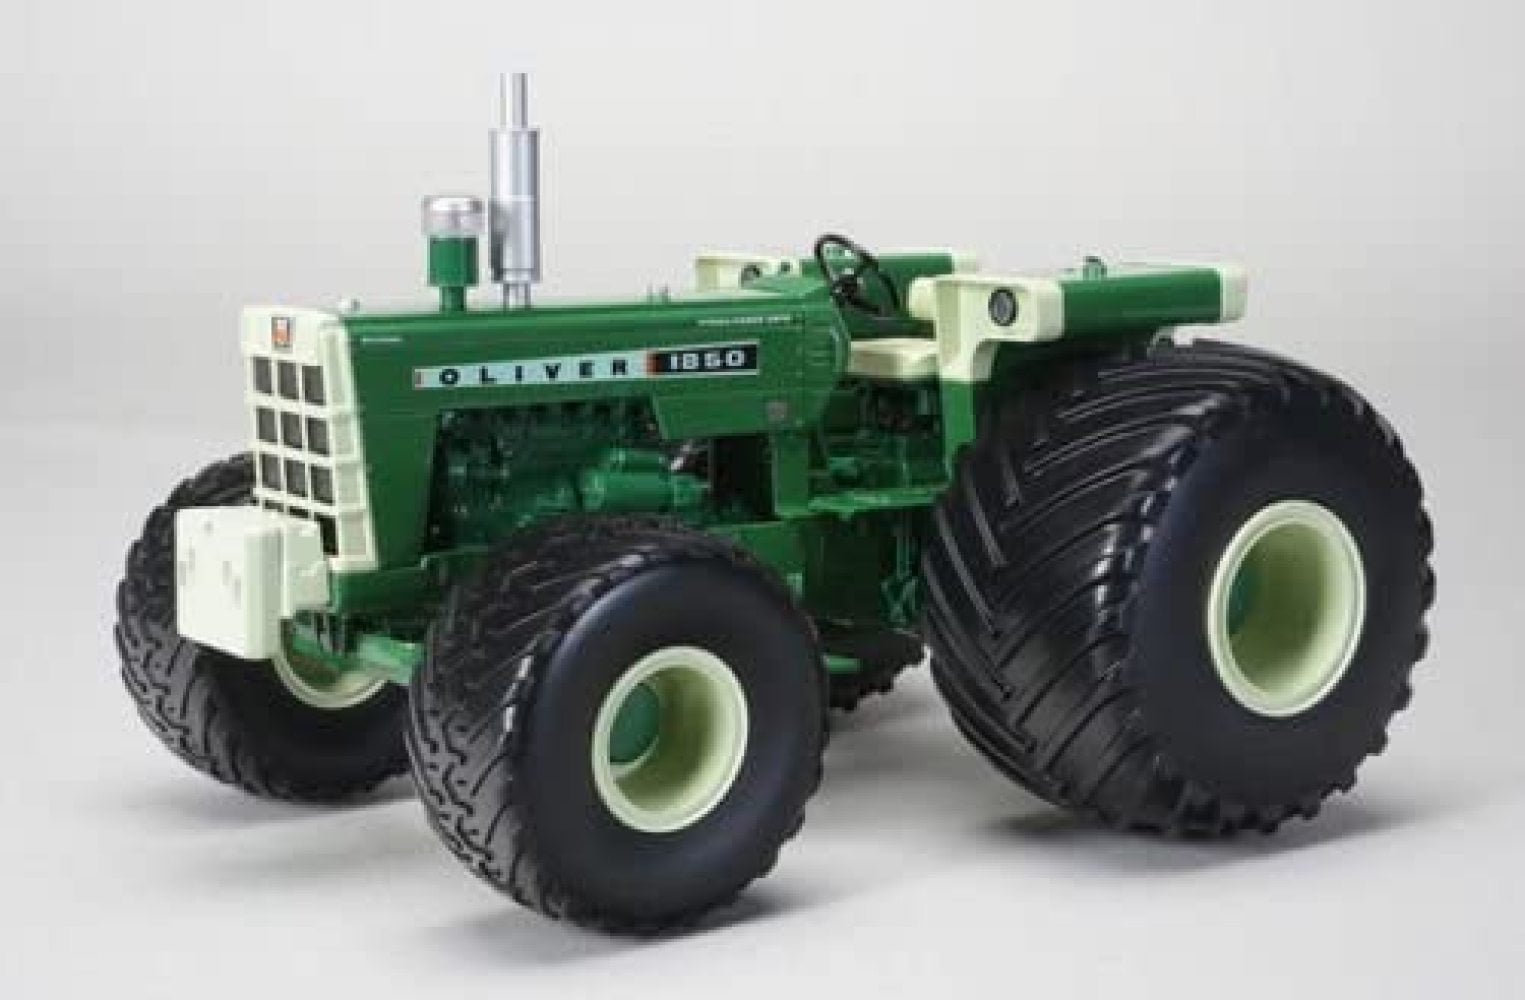 SPECCAST  OLIVER 1850 TRACTOR WITH TERRA TIRES SCT 630 1/16 